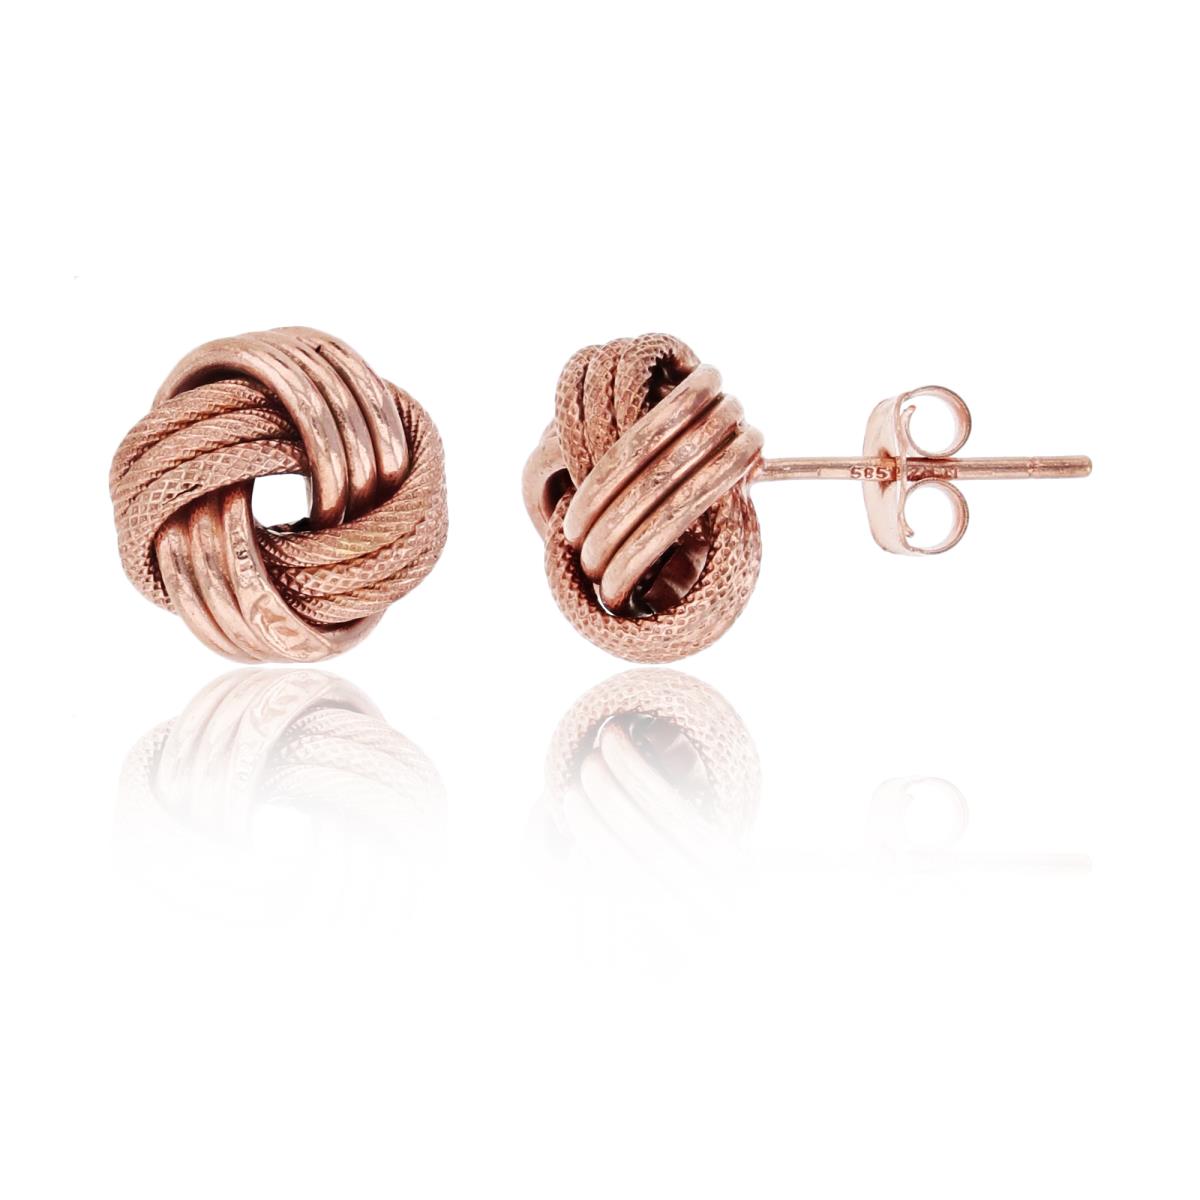 14K Rose Gold 9x9mm Polished & Textured Love Knot Stud Earring